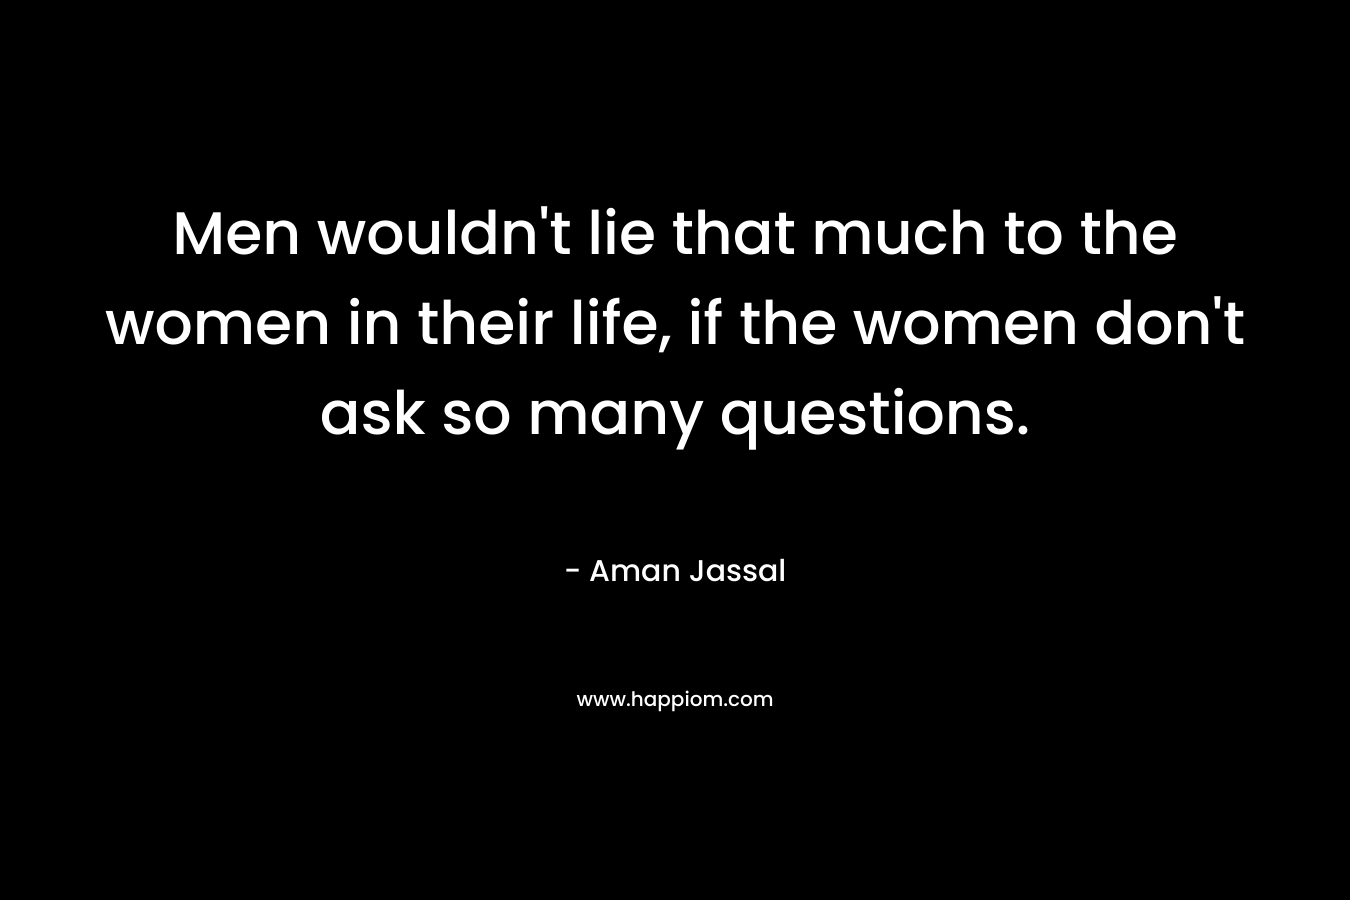 Men wouldn't lie that much to the women in their life, if the women don't ask so many questions.